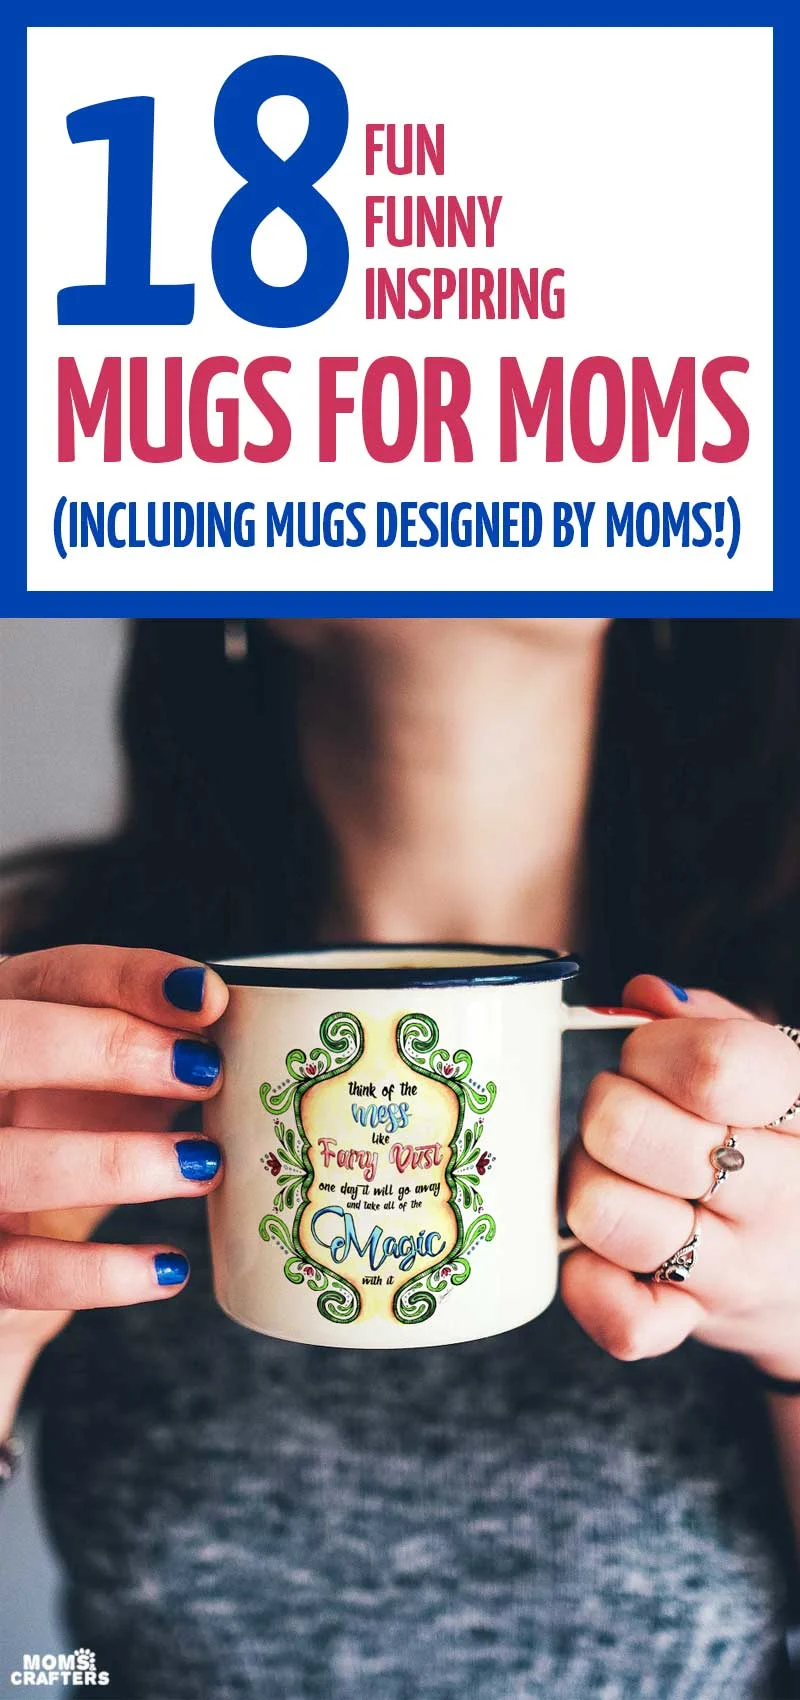 These 18 mom mug ideas are truly unique and worth giving! A coffee mug makes the perfect gifts for moms who live off of coffee... Give these mom mugs for Christmas, for Mother's day, or to show your appreciation any day! Whether it's for your daughter, a friend who is a mom, or your own mother, these mom mug gift ideas are perfect.